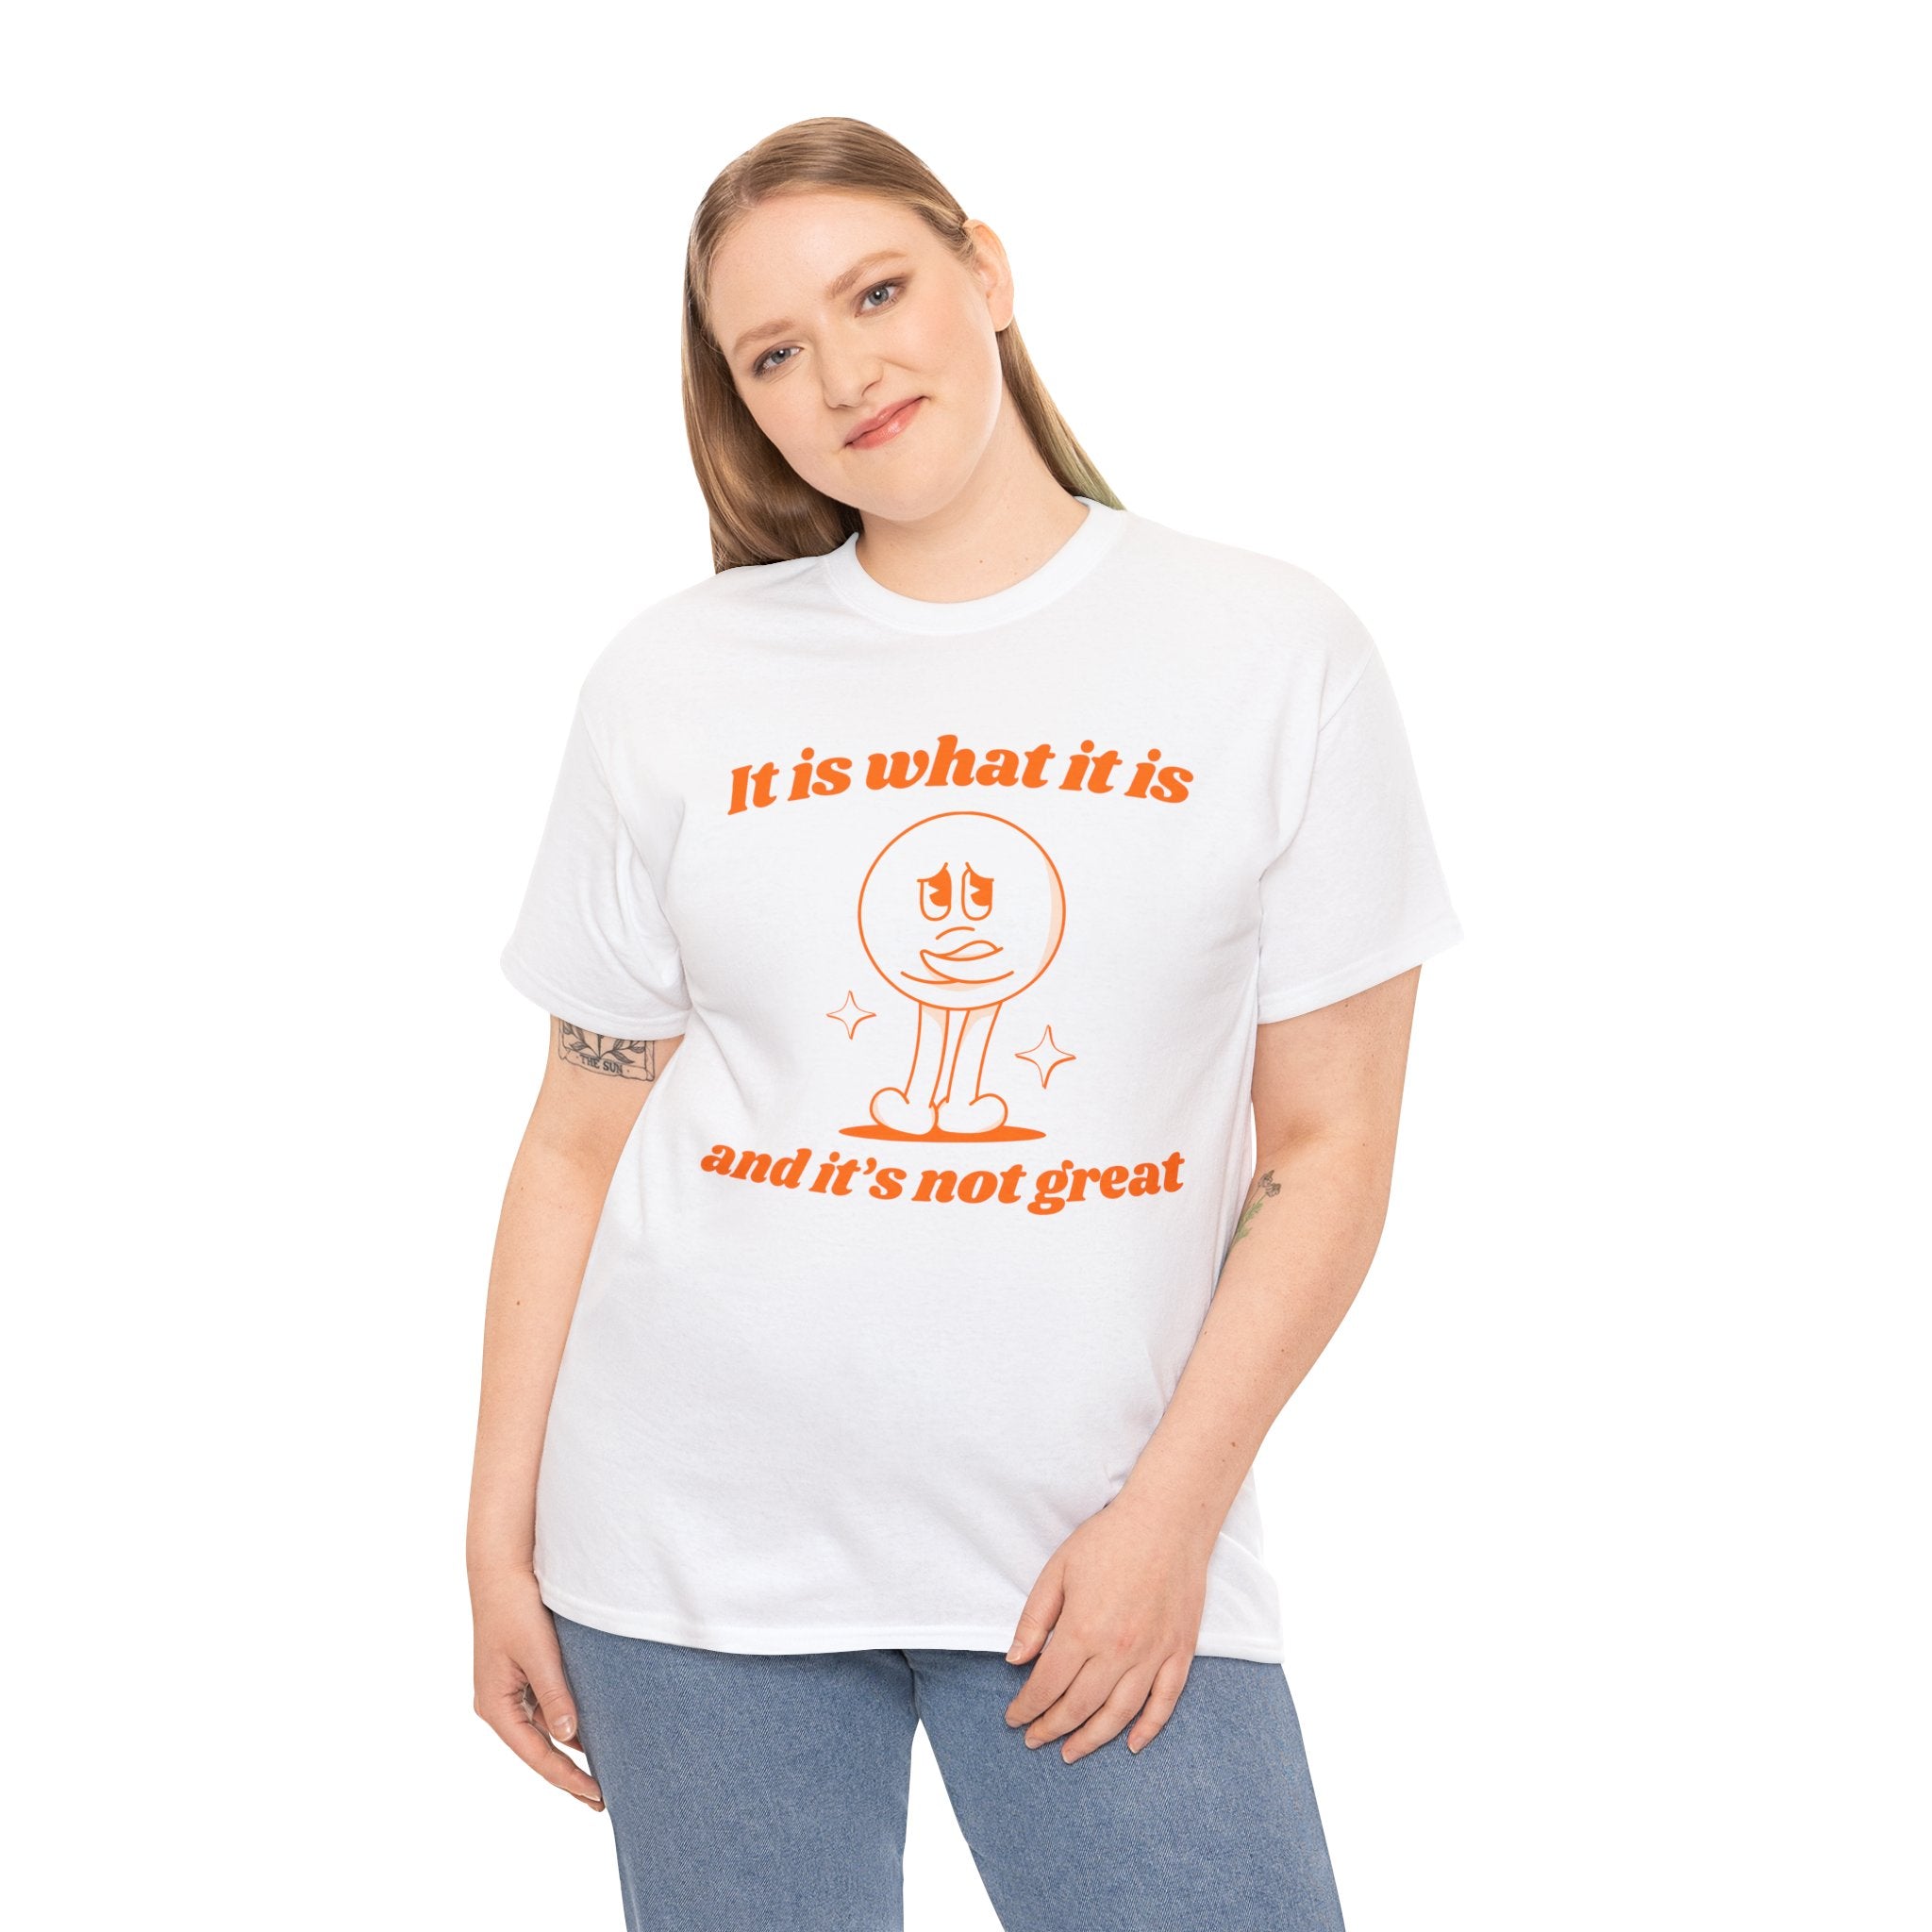 It is what it is and it's not great funny shirt | funny saying shirt | graphic tees | vintage shirt | sarcastic t-shirt | retro cartoon tee